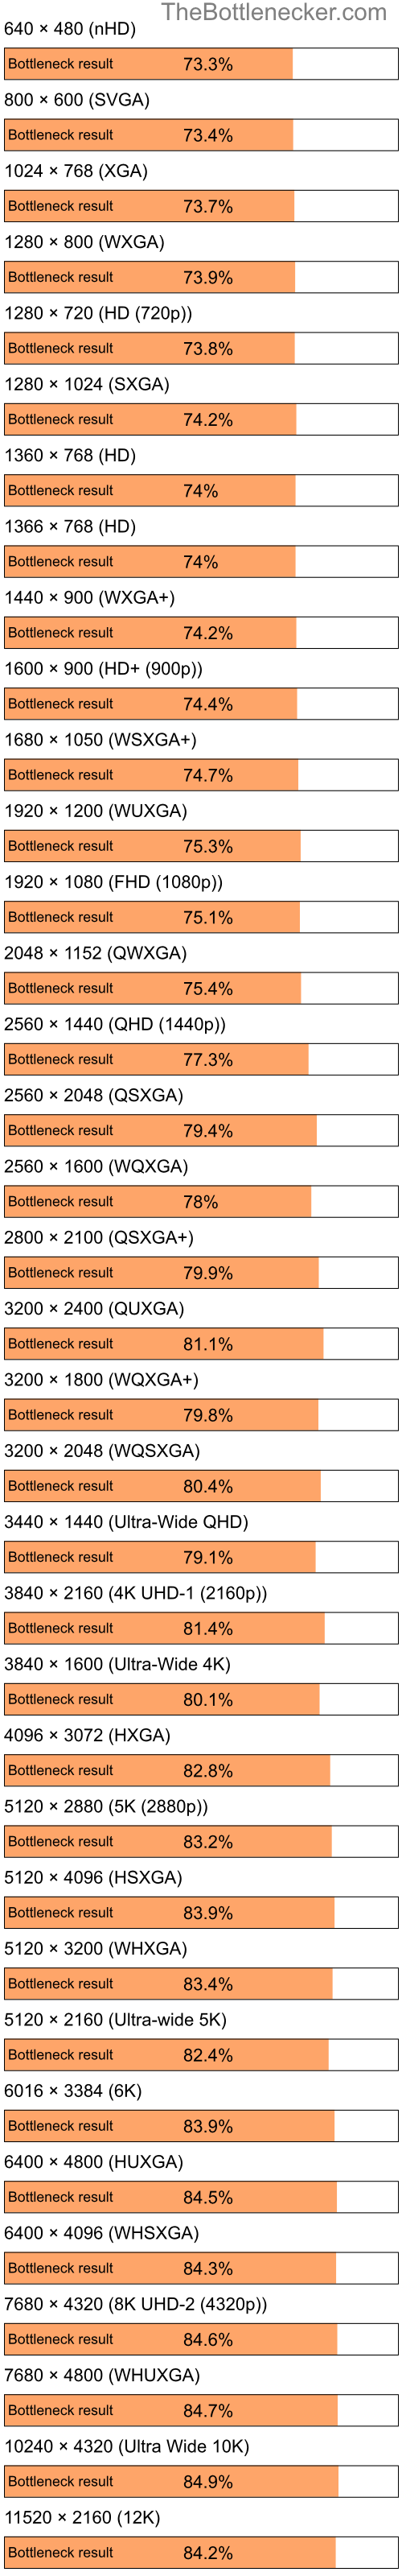 Bottleneck results by resolution for Intel Celeron M and AMD Radeon 3100 in Graphic Card Intense Tasks